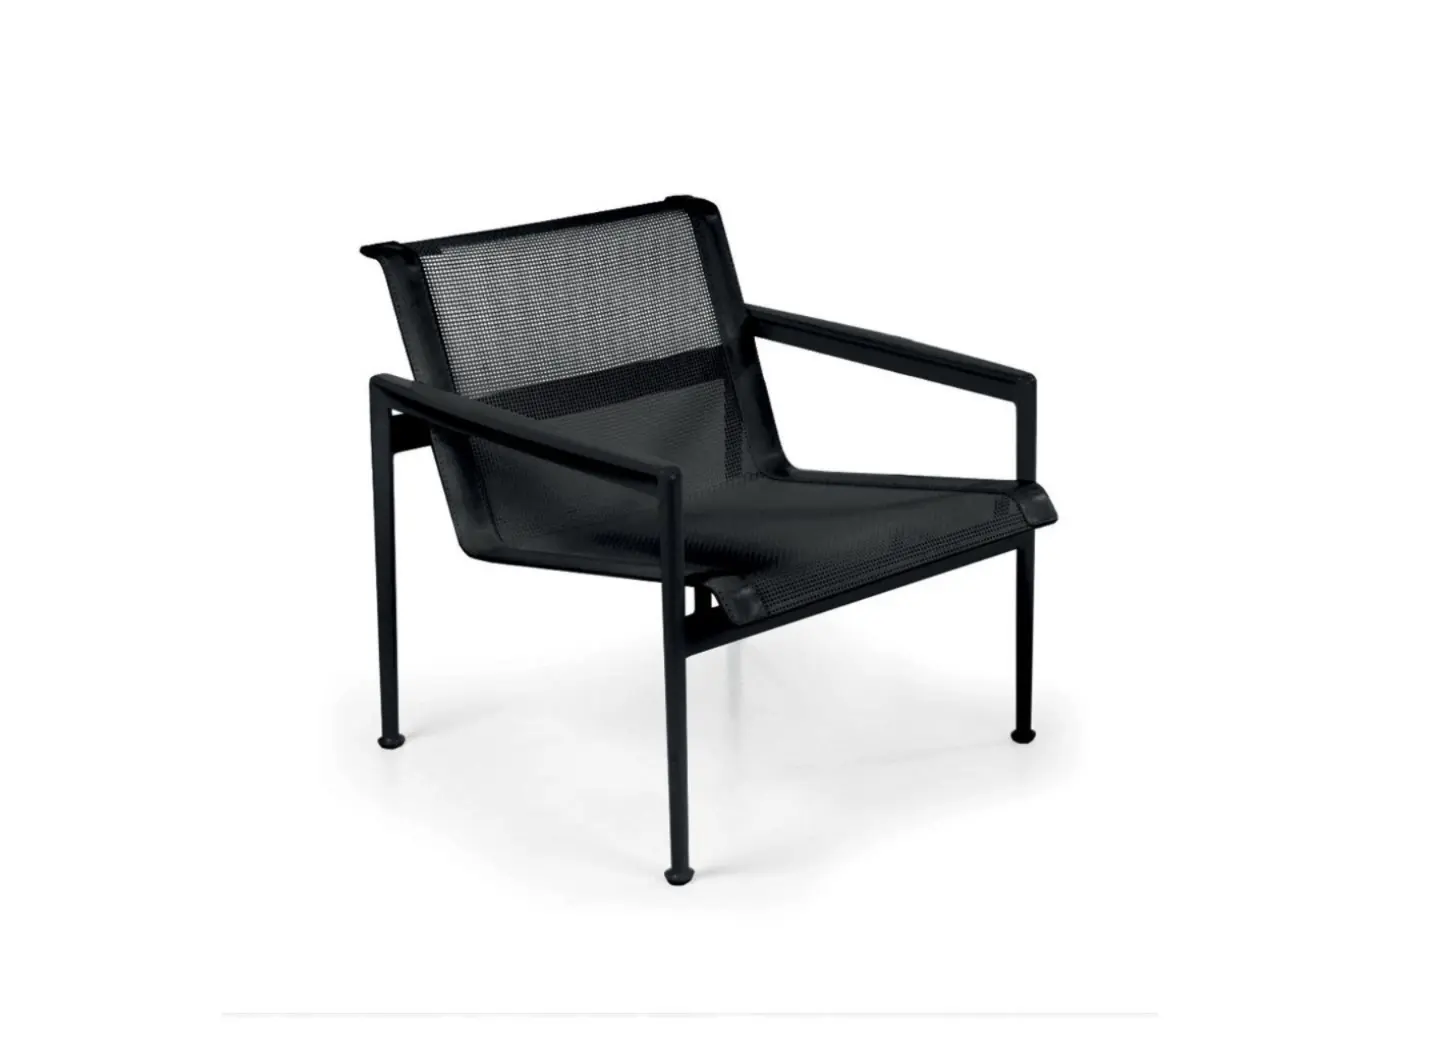 Knoll_1966 Lounge Chair by Richard Schultz